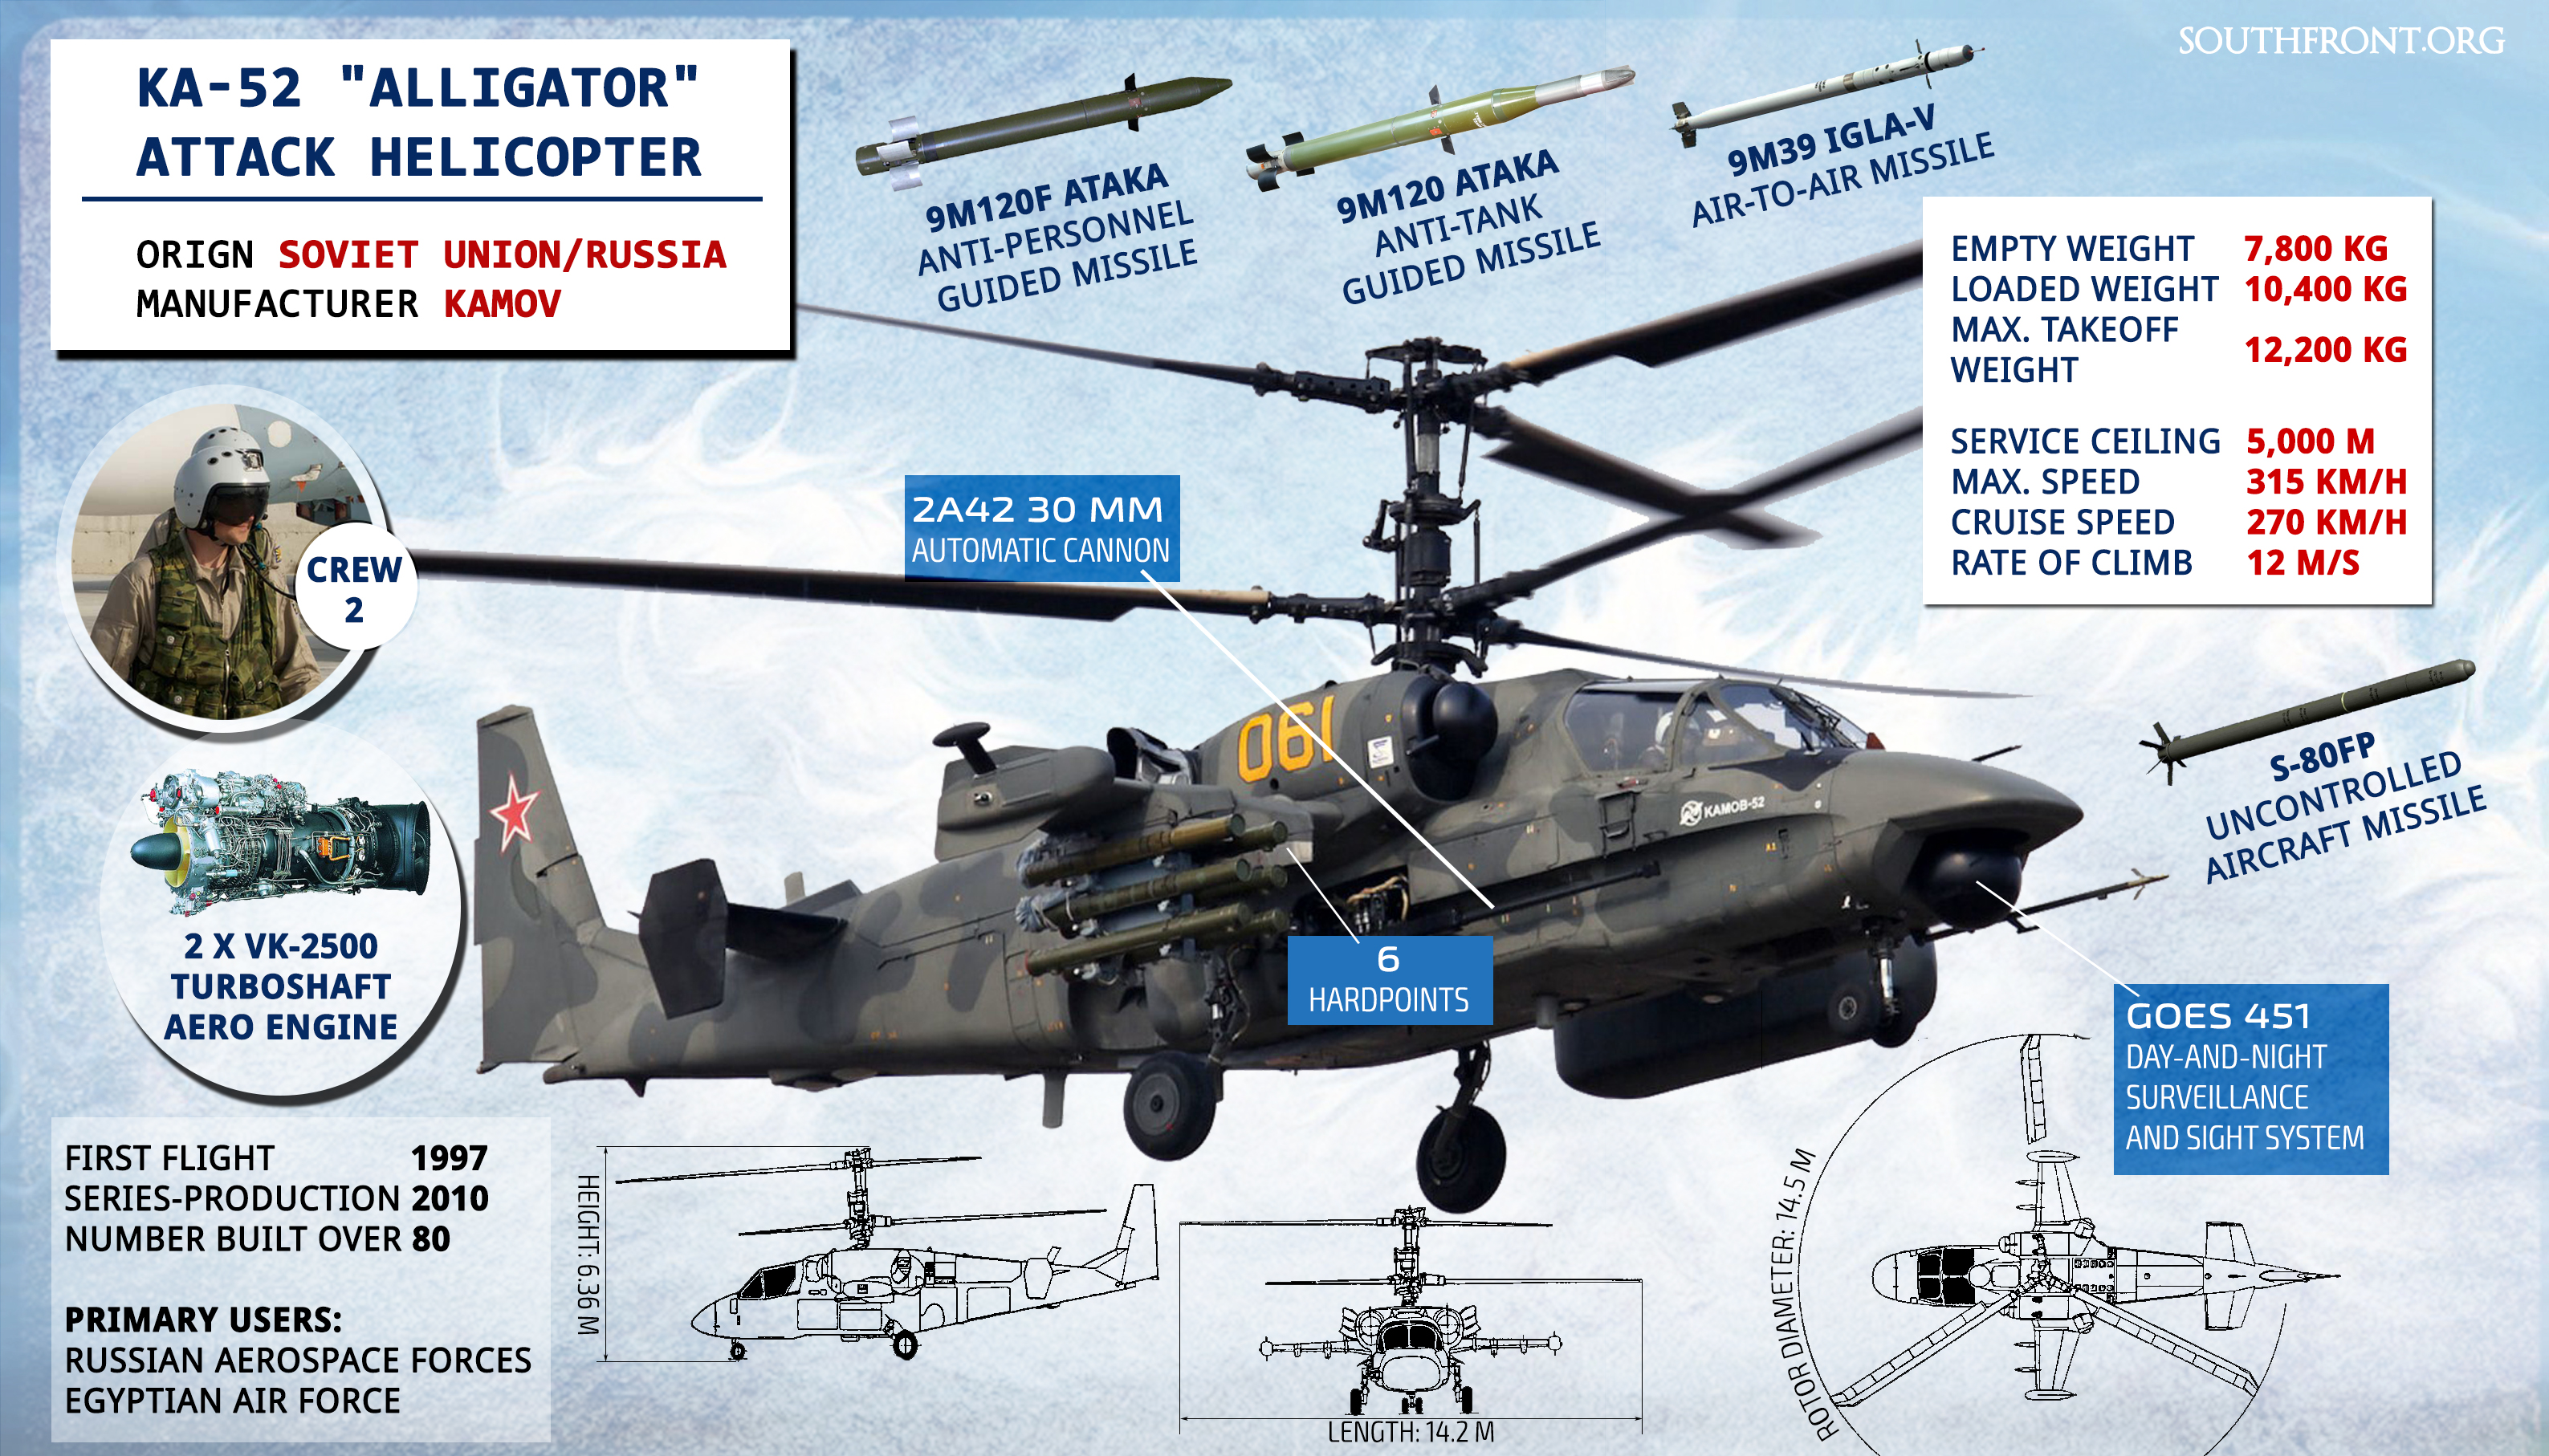 Russian Helicopters to Use Advance Long Range Missiles against Terrorists in Syria